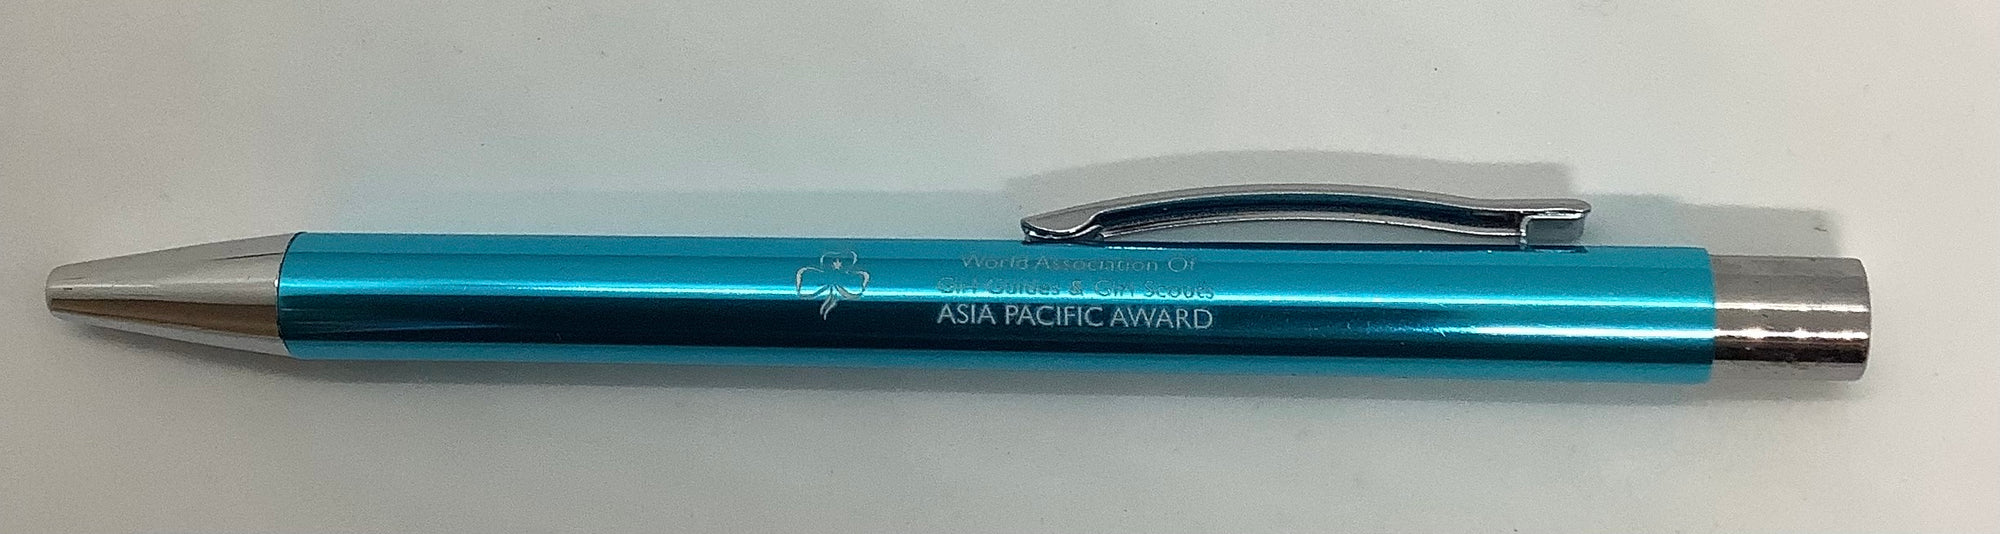 teal blue one with the trefoil and Asia pacific award engraved into it